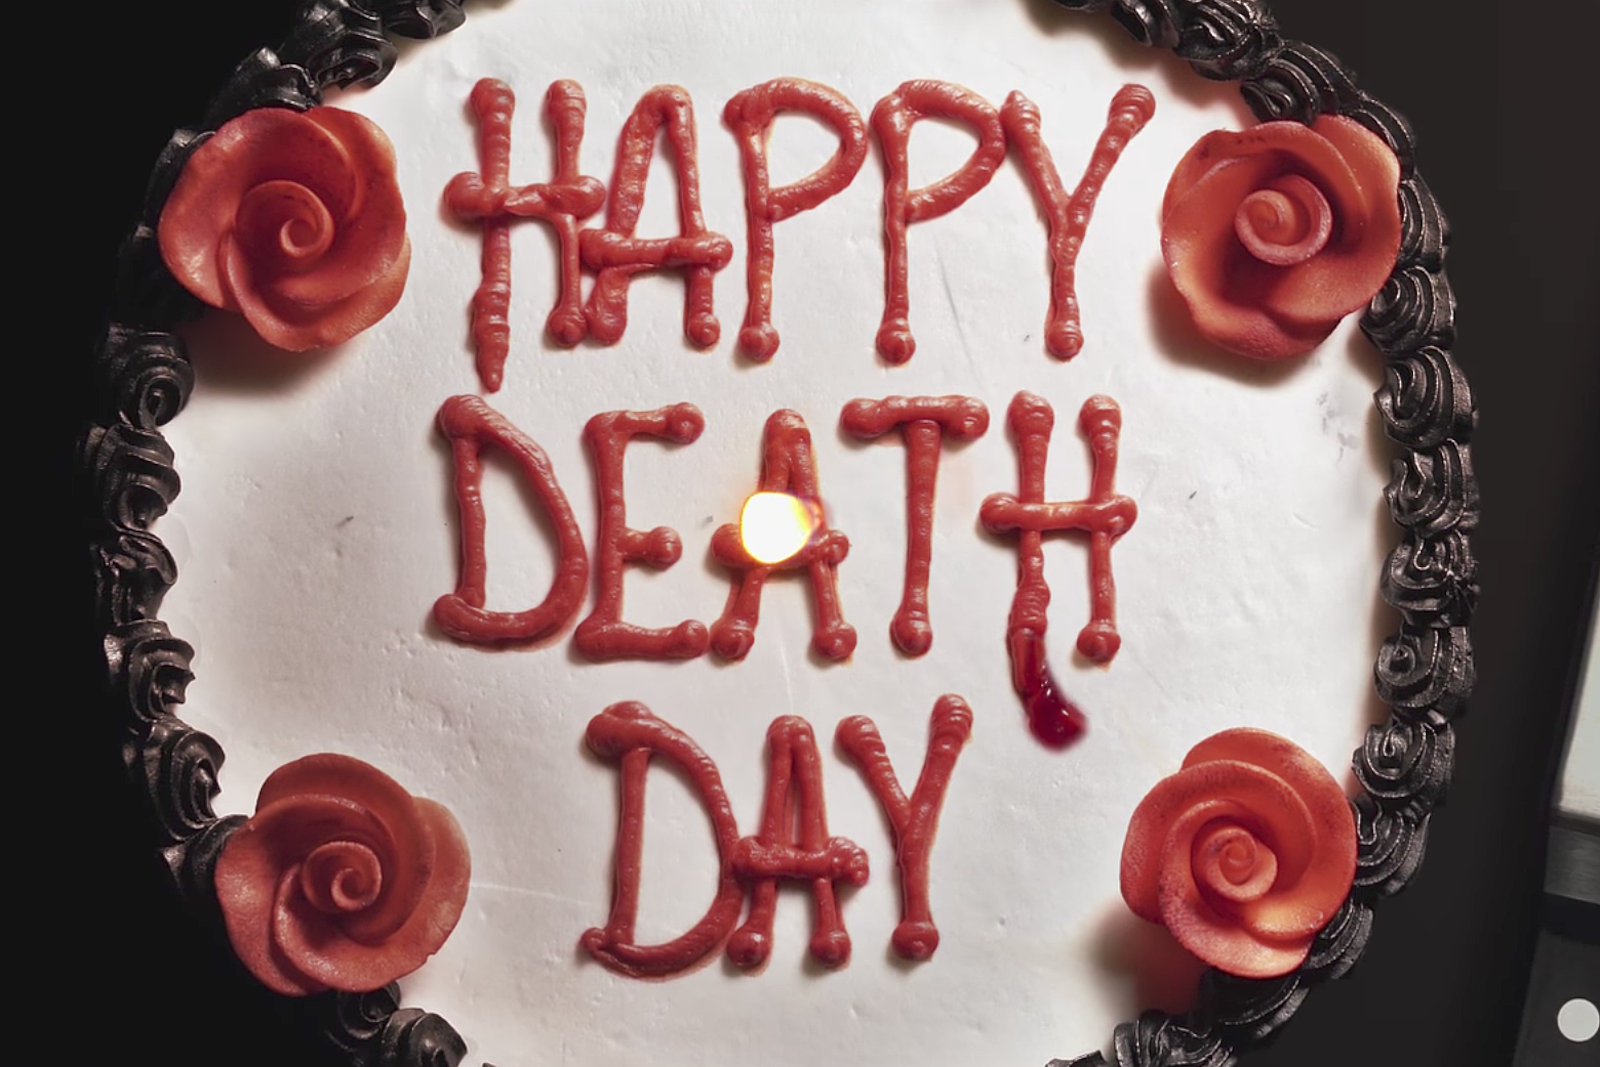 Happy Deathday to You...and Other Stories to Give You Nightmares by George E. Stanley